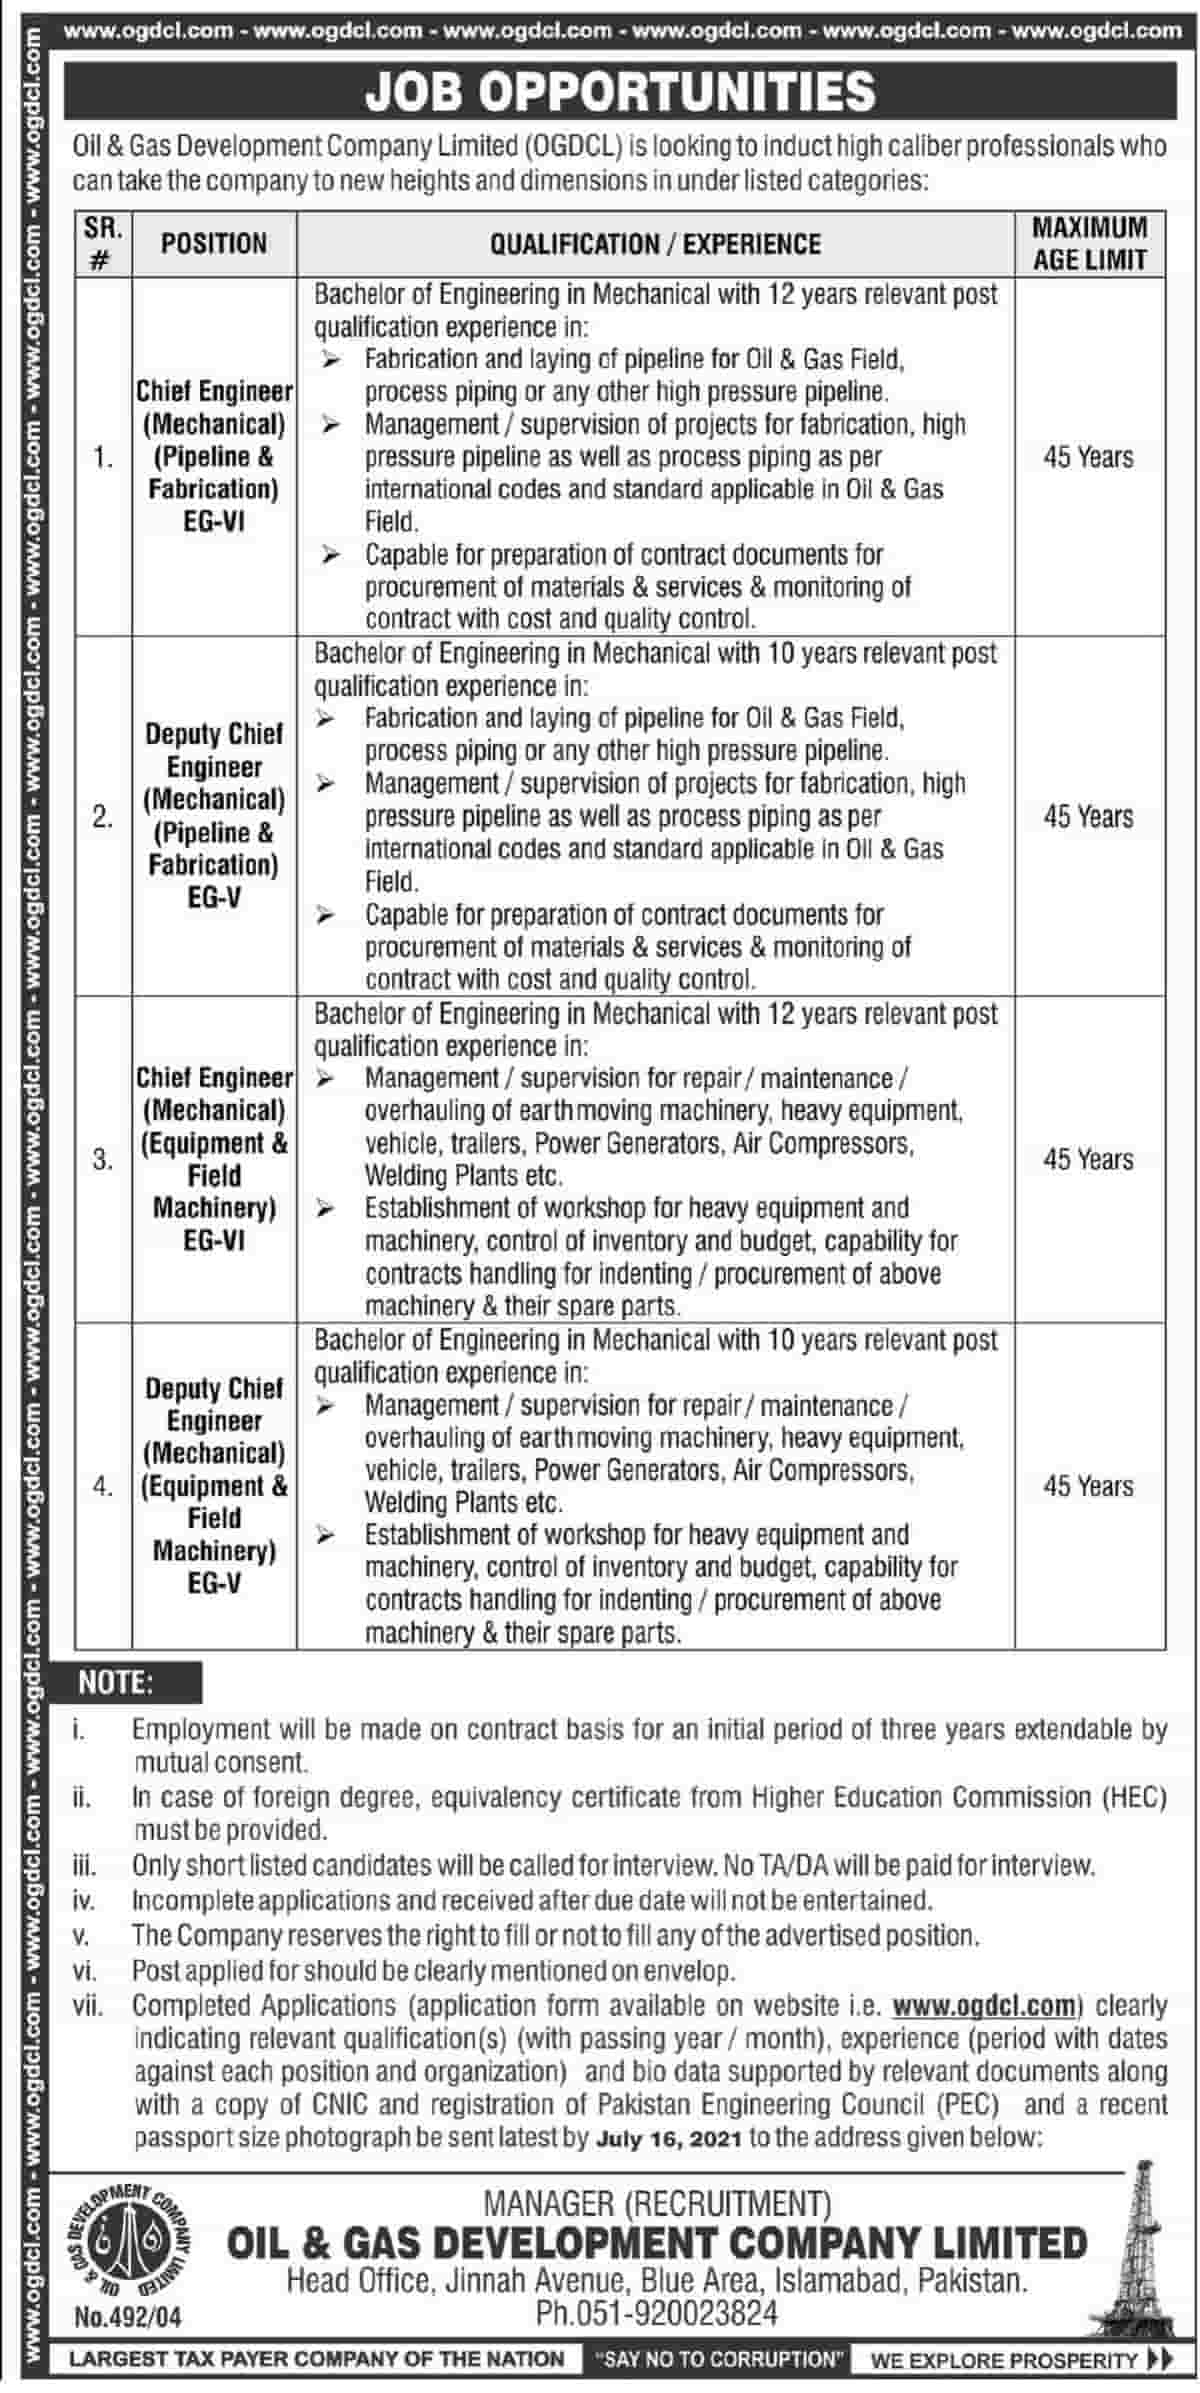 OGDCL Jobs 2021 www.ogdcl.com Apply Online Latest Advertisement